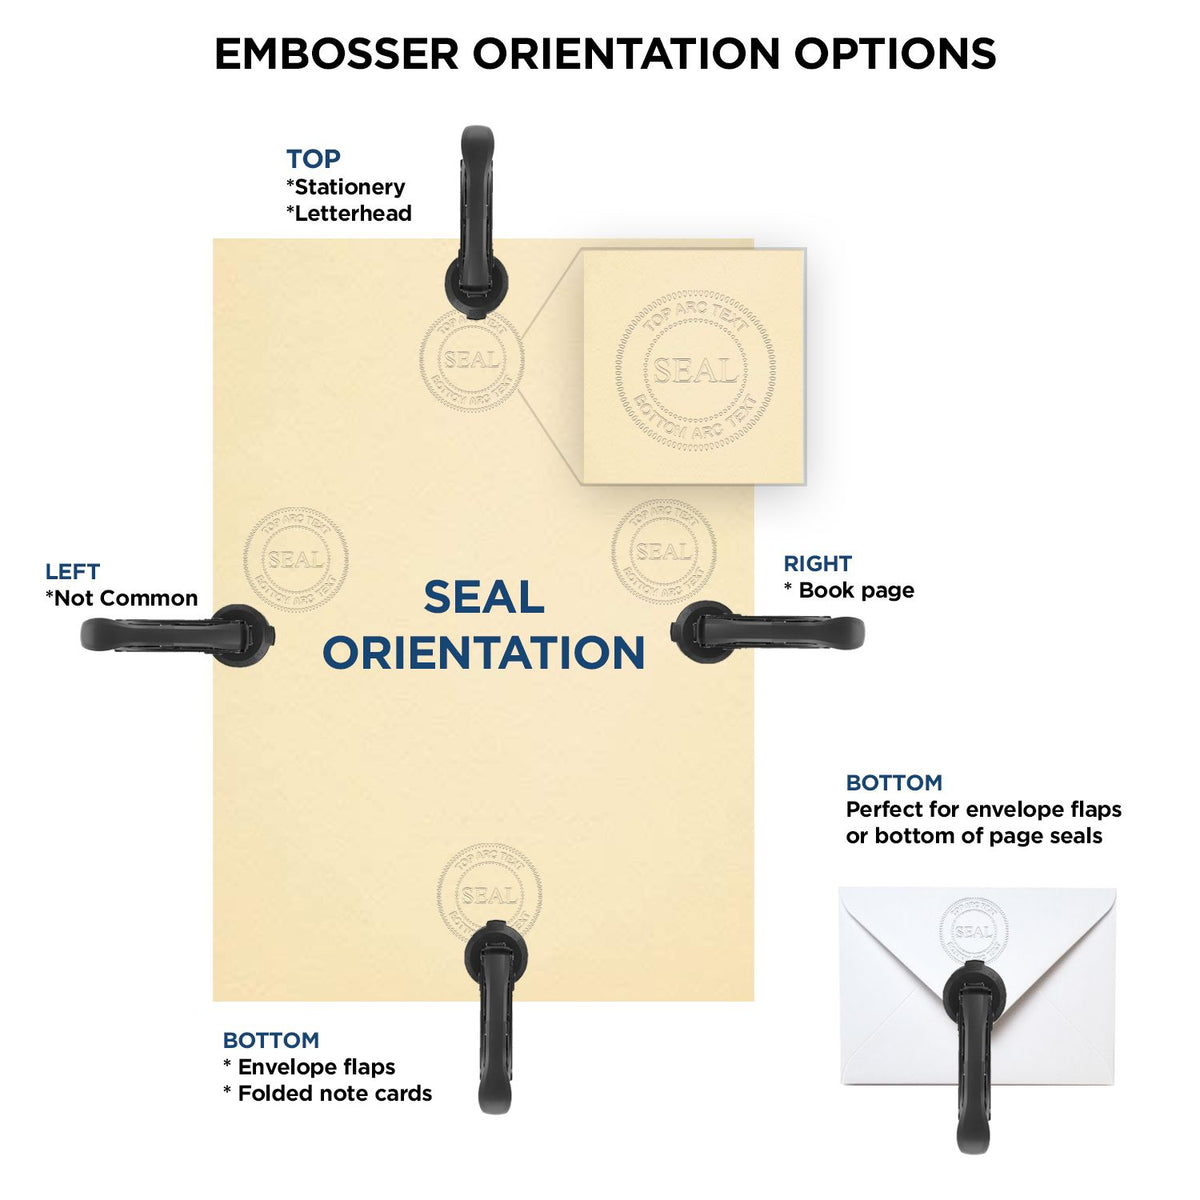 An infographic for the Heavy Duty Cast Iron Connecticut Land Surveyor Seal Embosser showing embosser orientation, this is showing examples of a top, bottom, right and left insert.